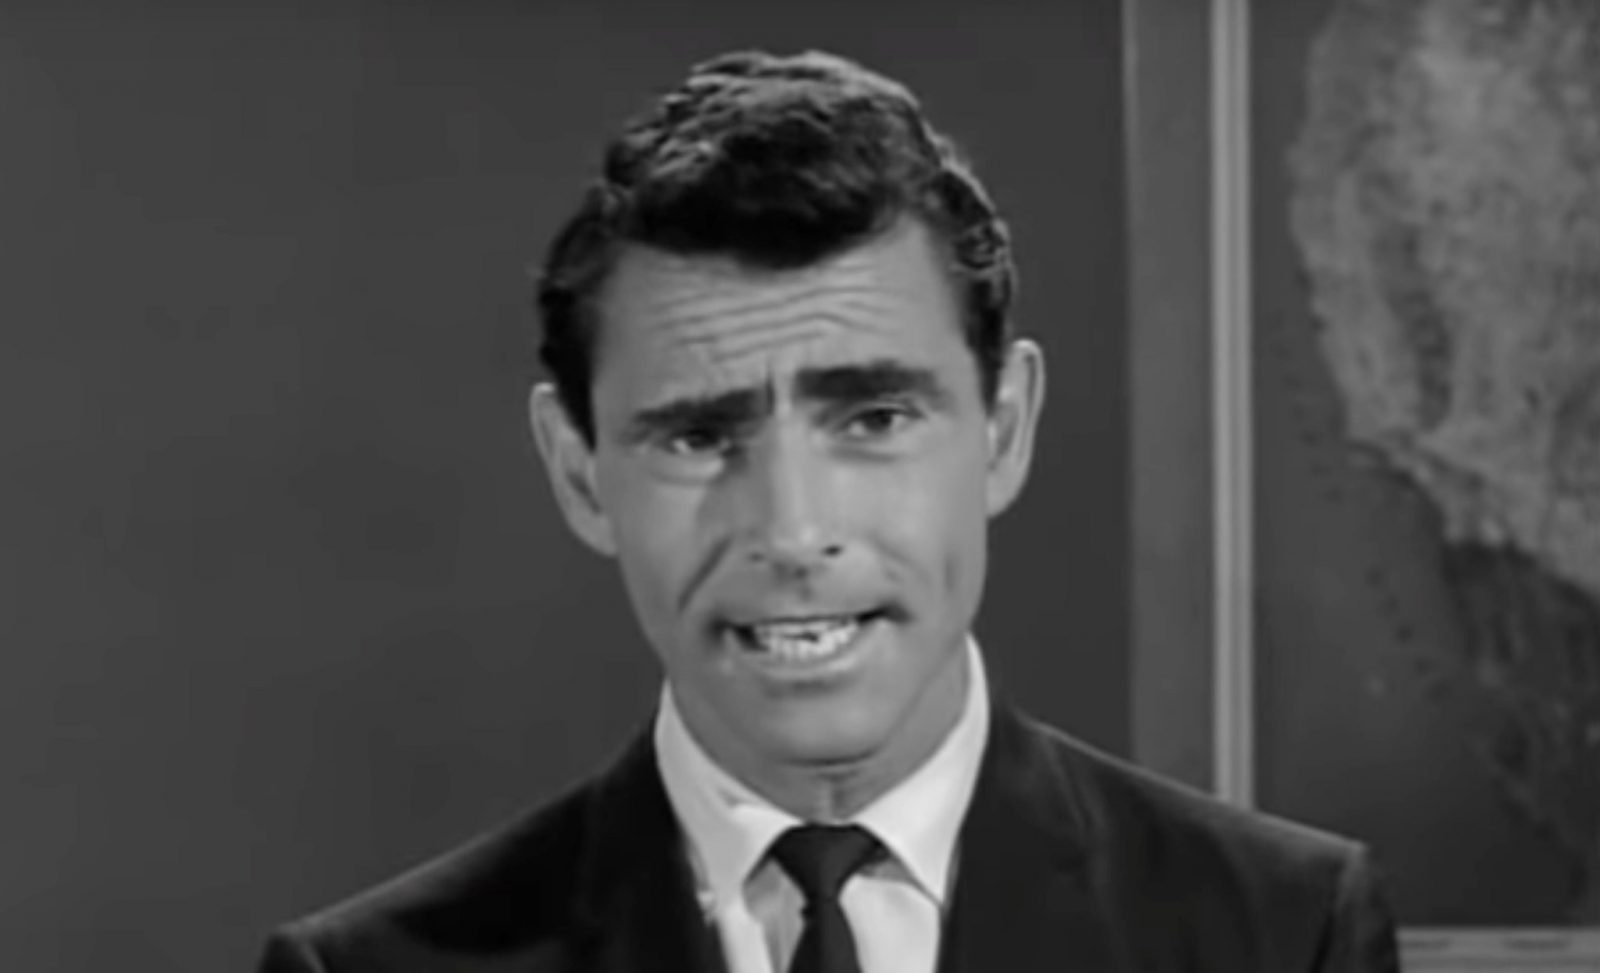 If You Get Over 80% On This General Knowledge Quiz, You’re Way Too Smart Rod Serling The Twilight Zone 5fb87f513ecb930b